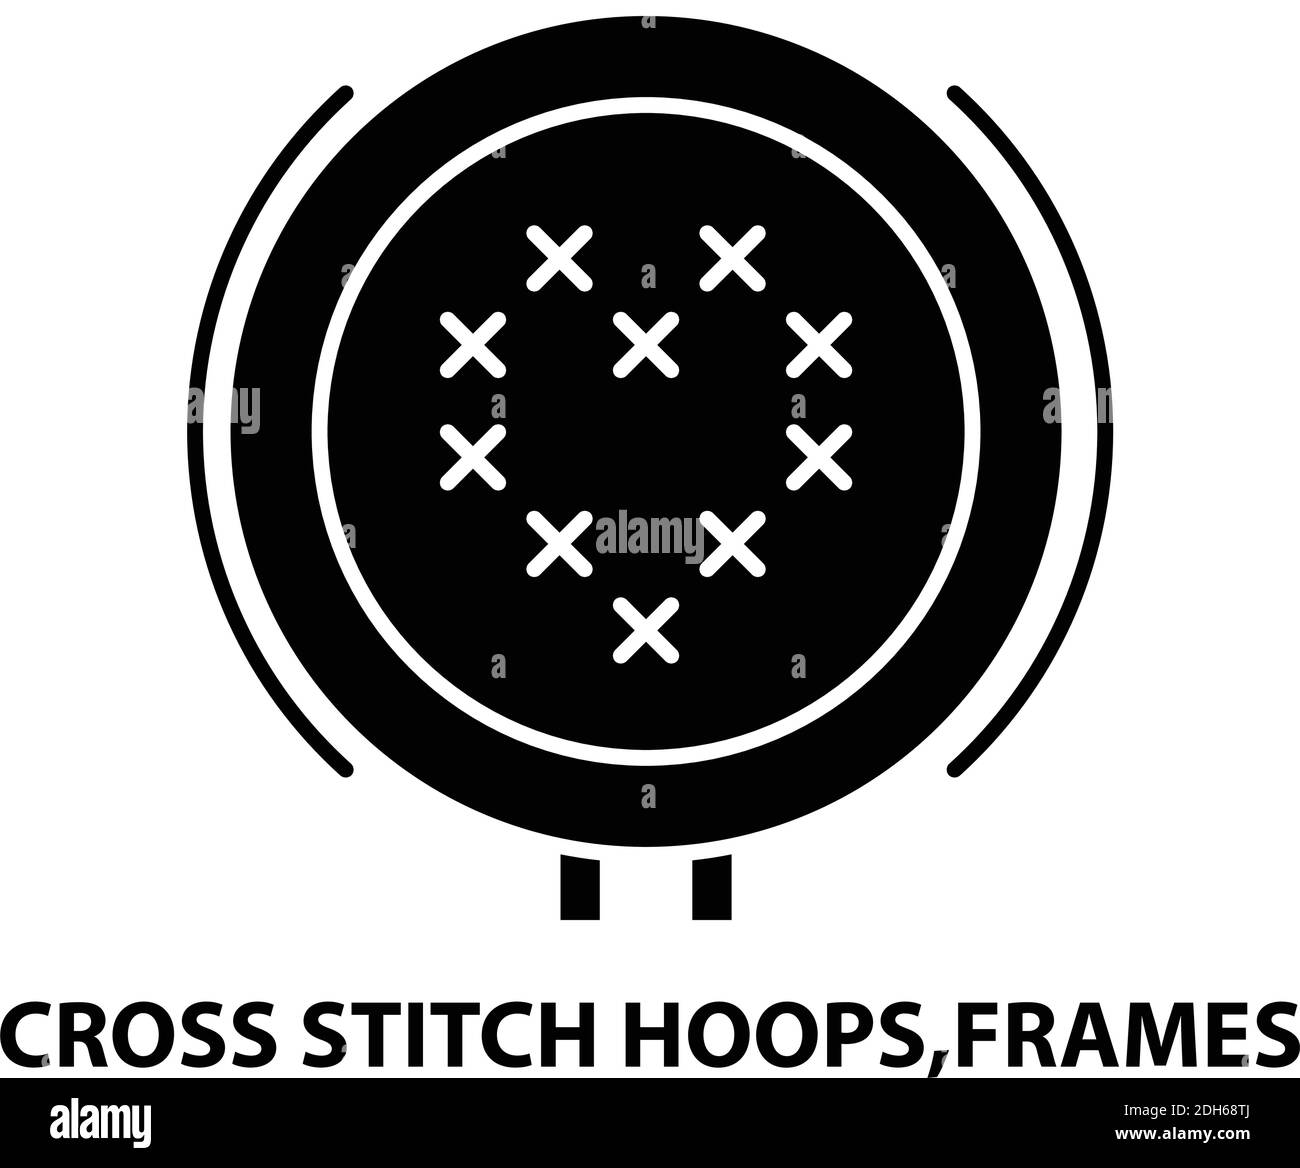 cross stitch hoops and frames icon, black vector sign with